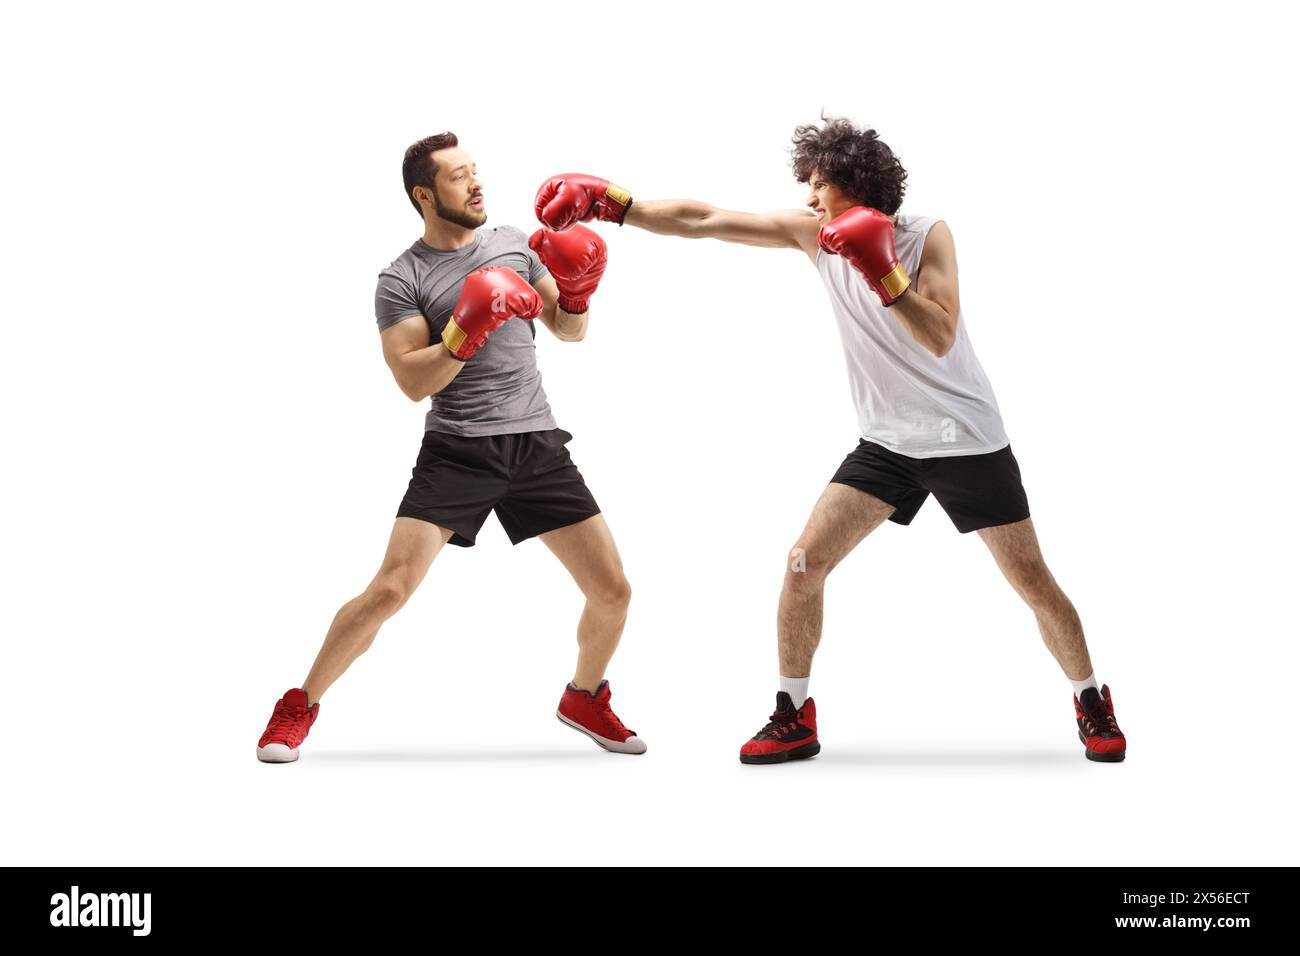 Young men fighting with boxing gloves isolated on white background Stock Photo